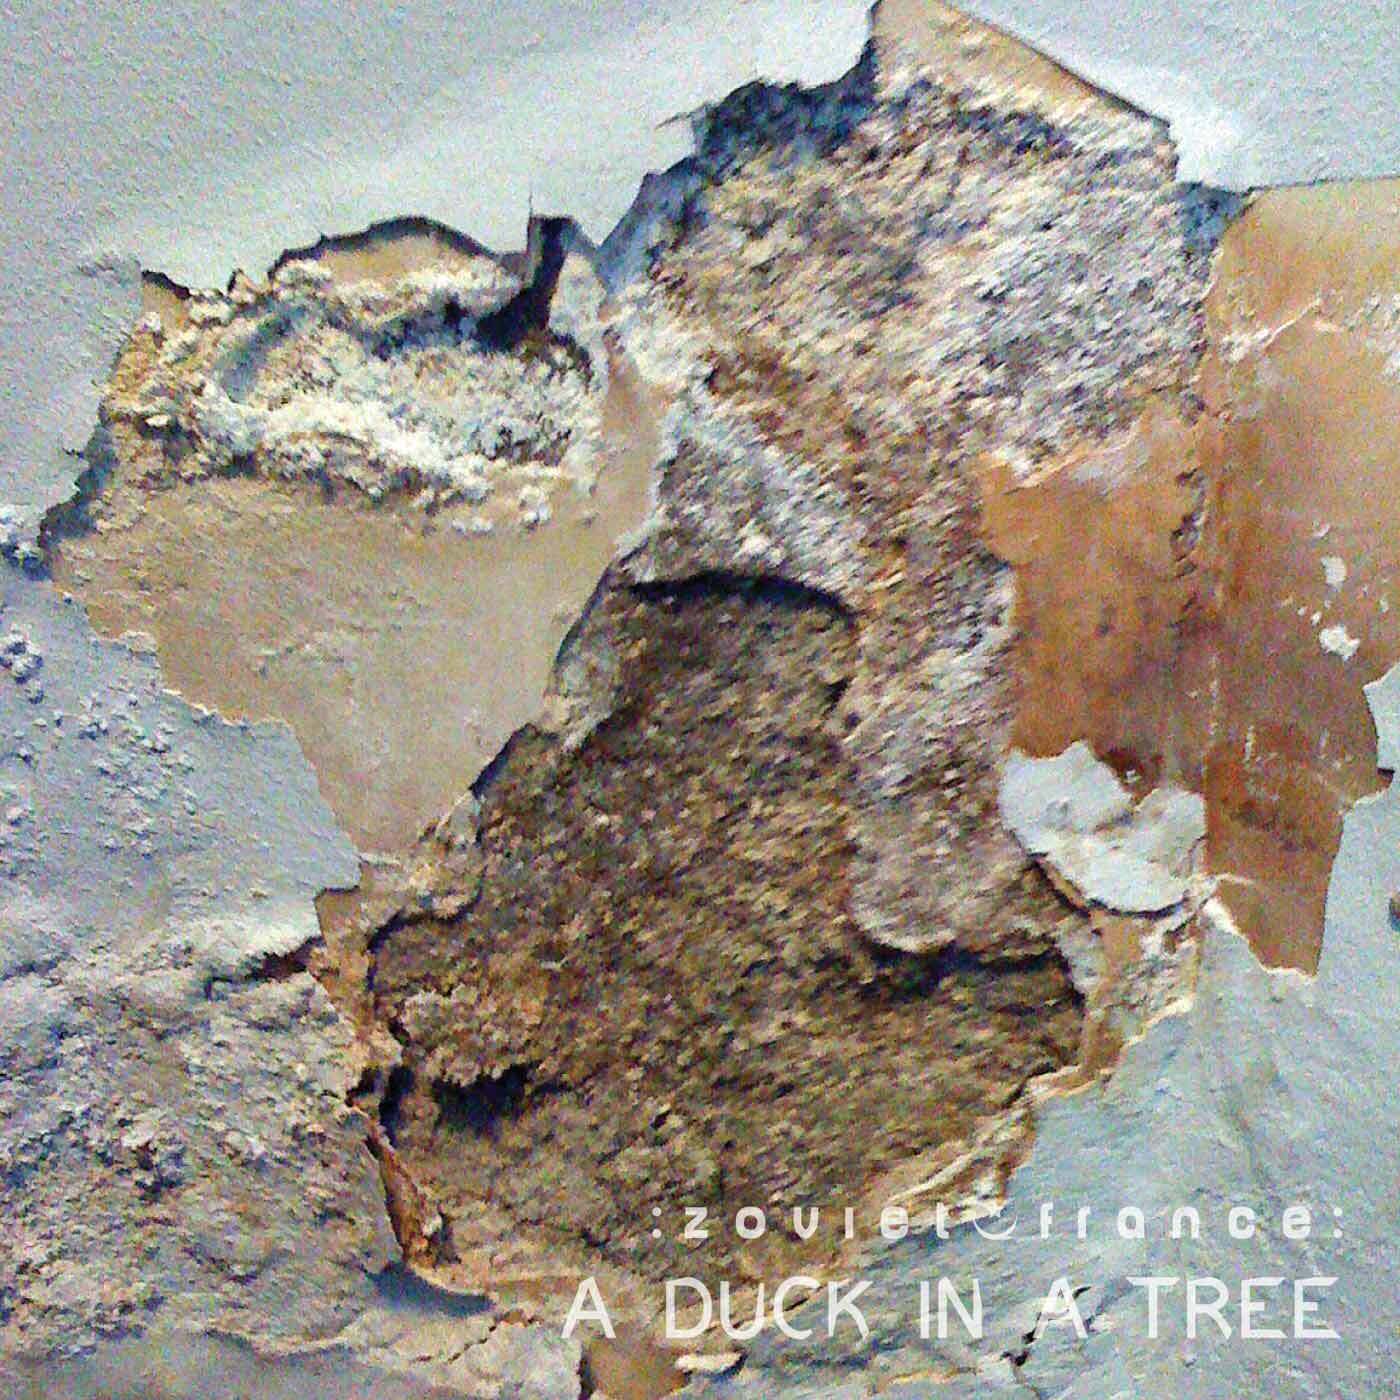 A-Duck-in-a-Tree-2014-06-21-_-The-Measur